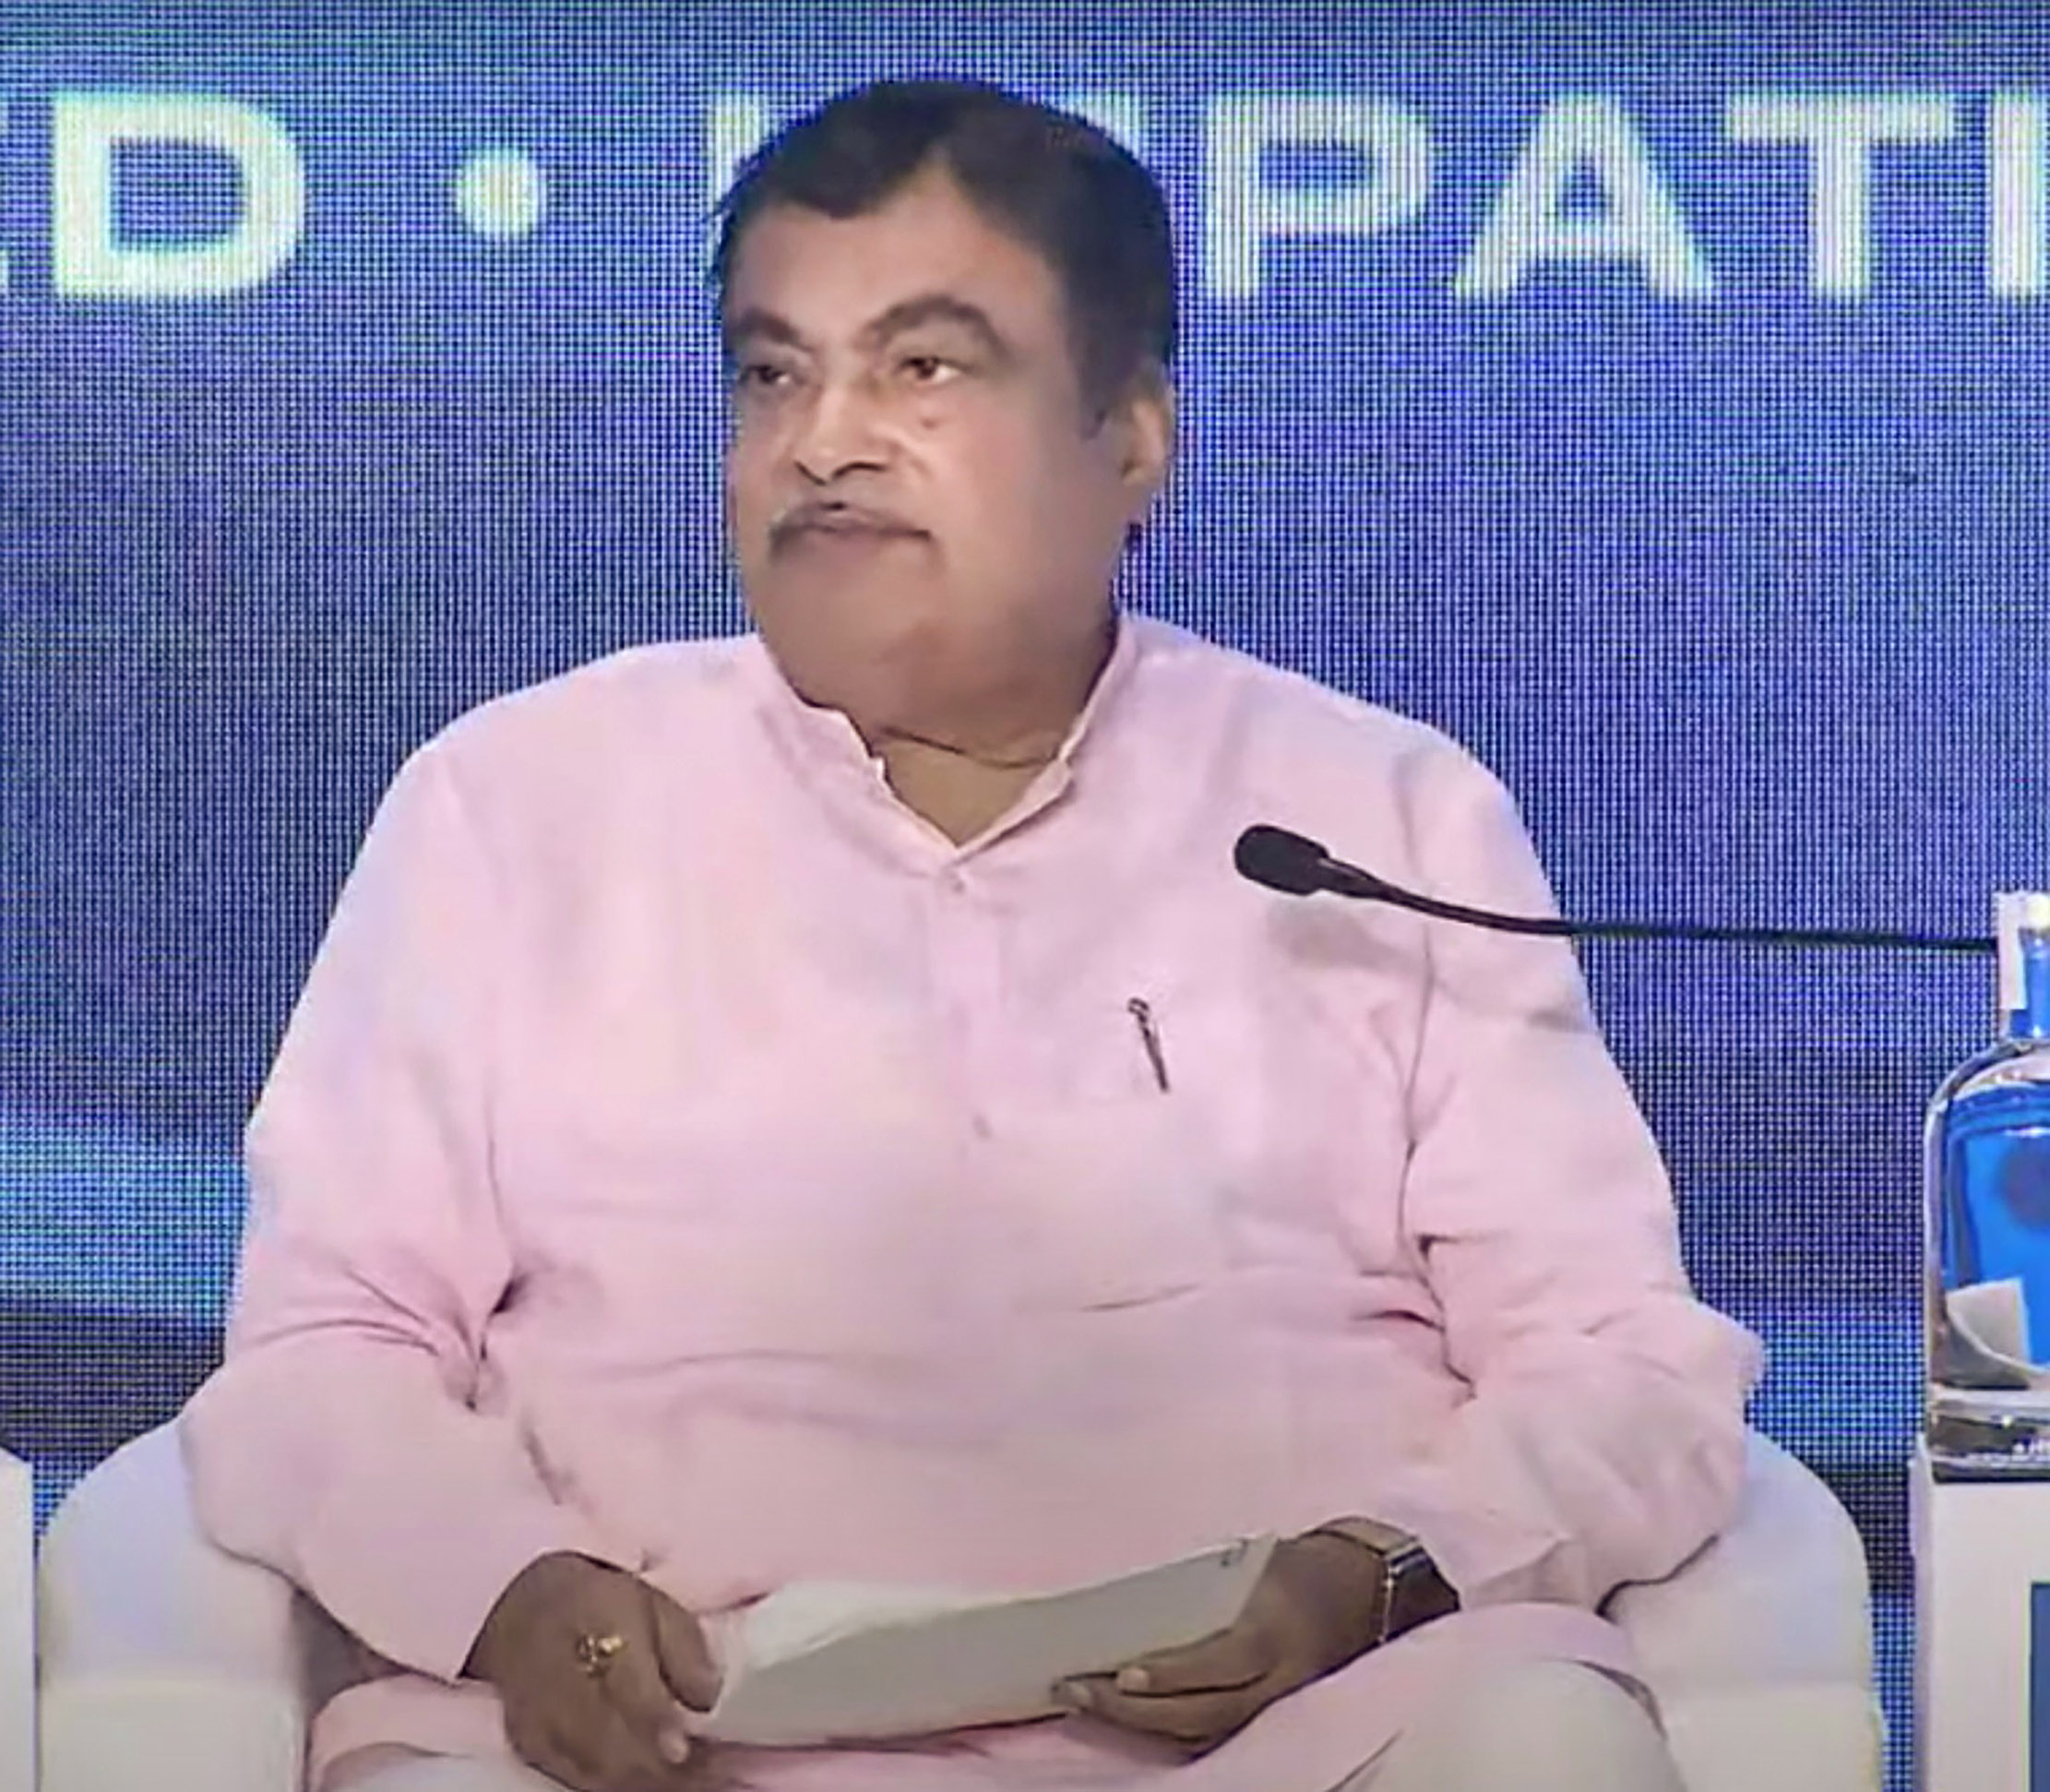 EV prices to be on par with cost of petrol vehicles within a year: Nitin Gadkari